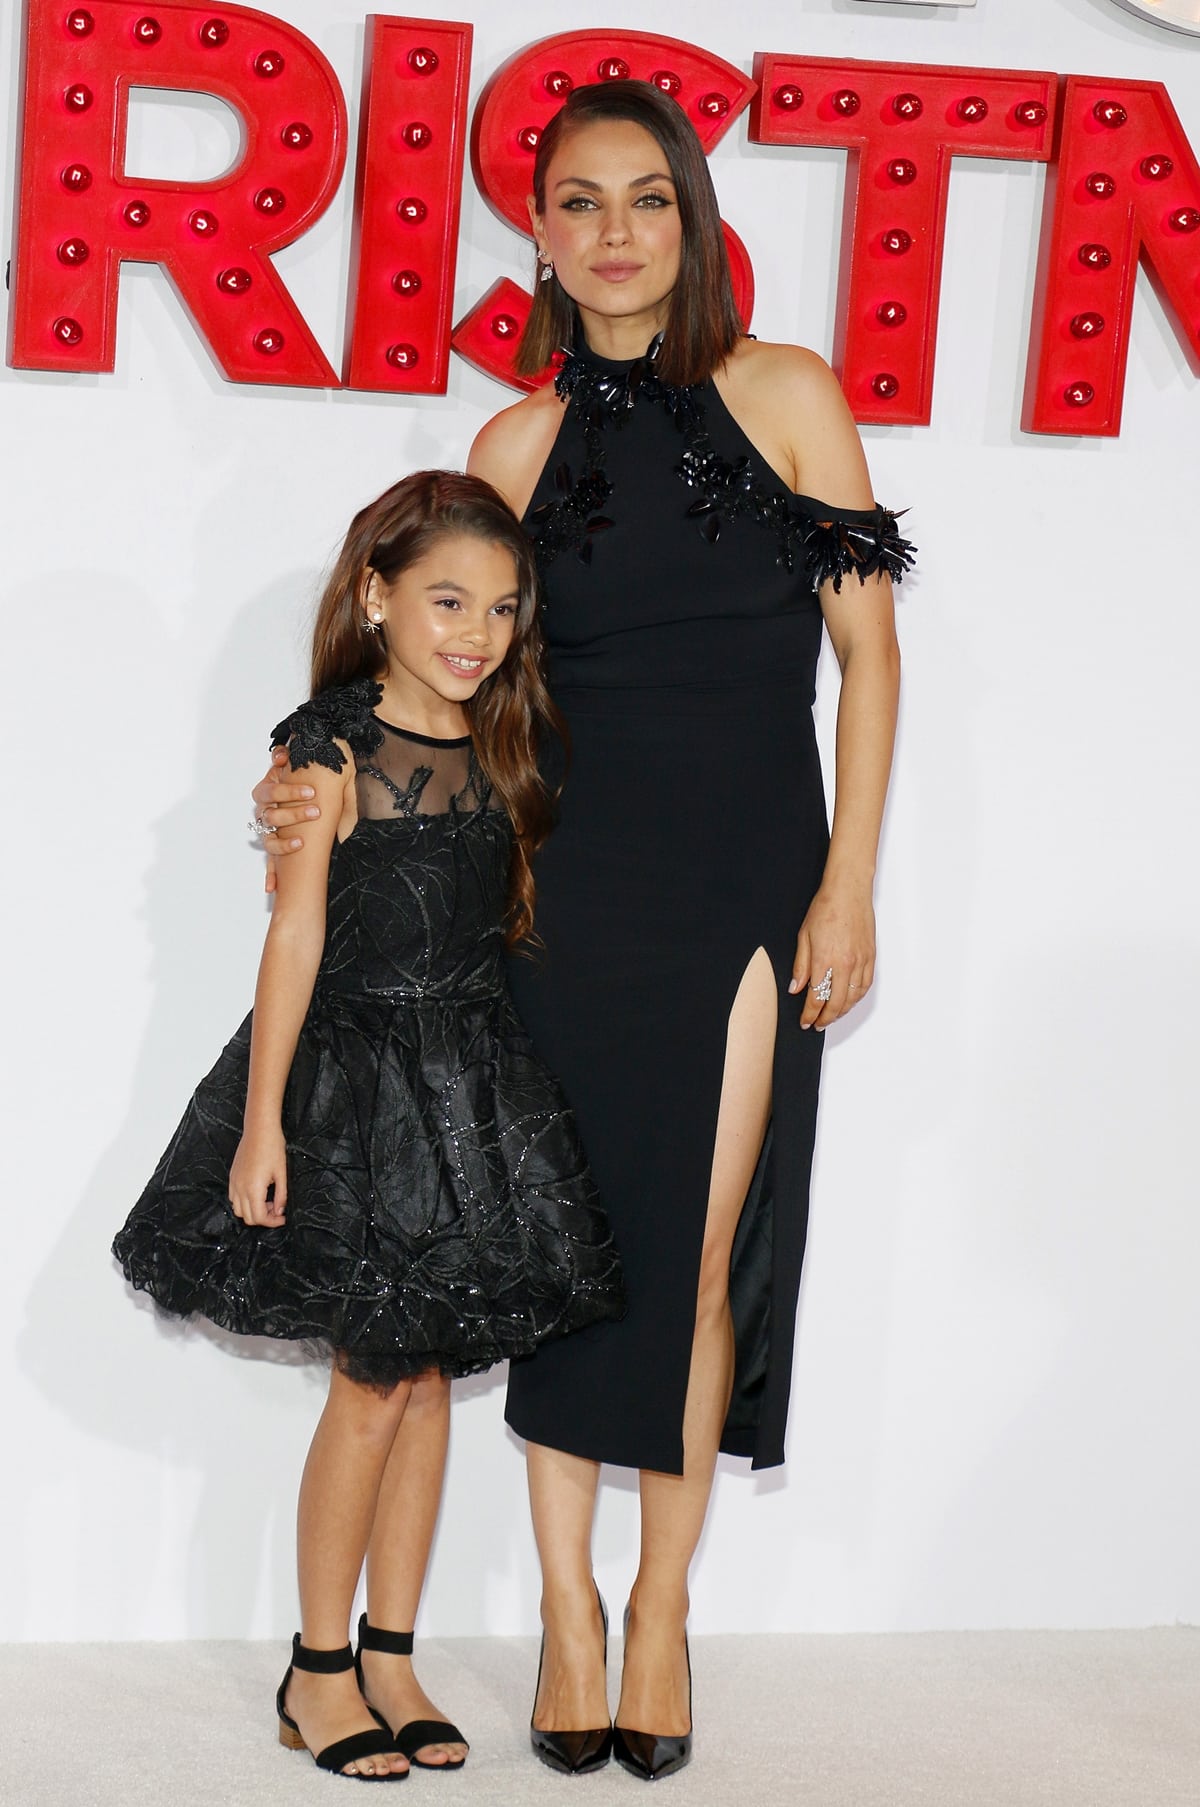 Mila Kunis Mila Kunis poses with young co-star Ariana Greenblatt at the premiere of STX Entertainment's "A Bad Moms Christmas"